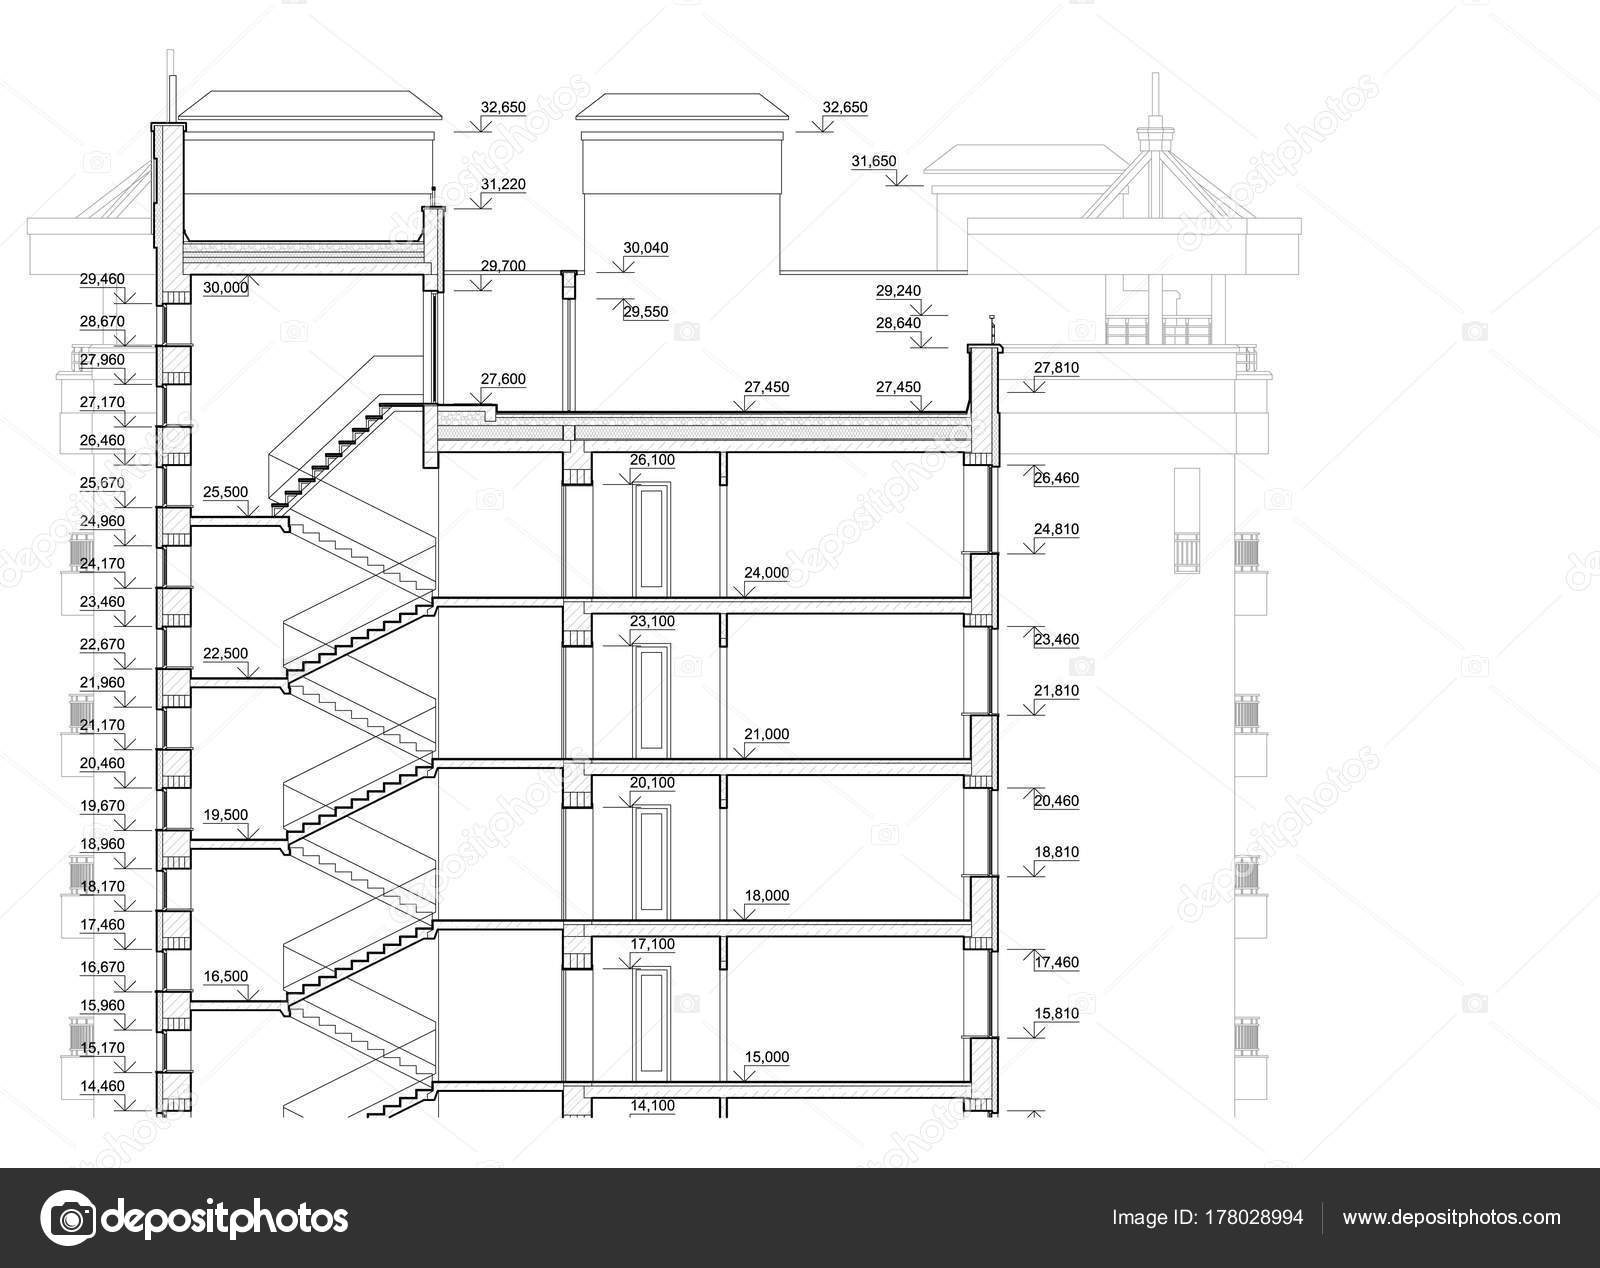 Detailed Architectural Plan Multistory Building Cross Section View ...